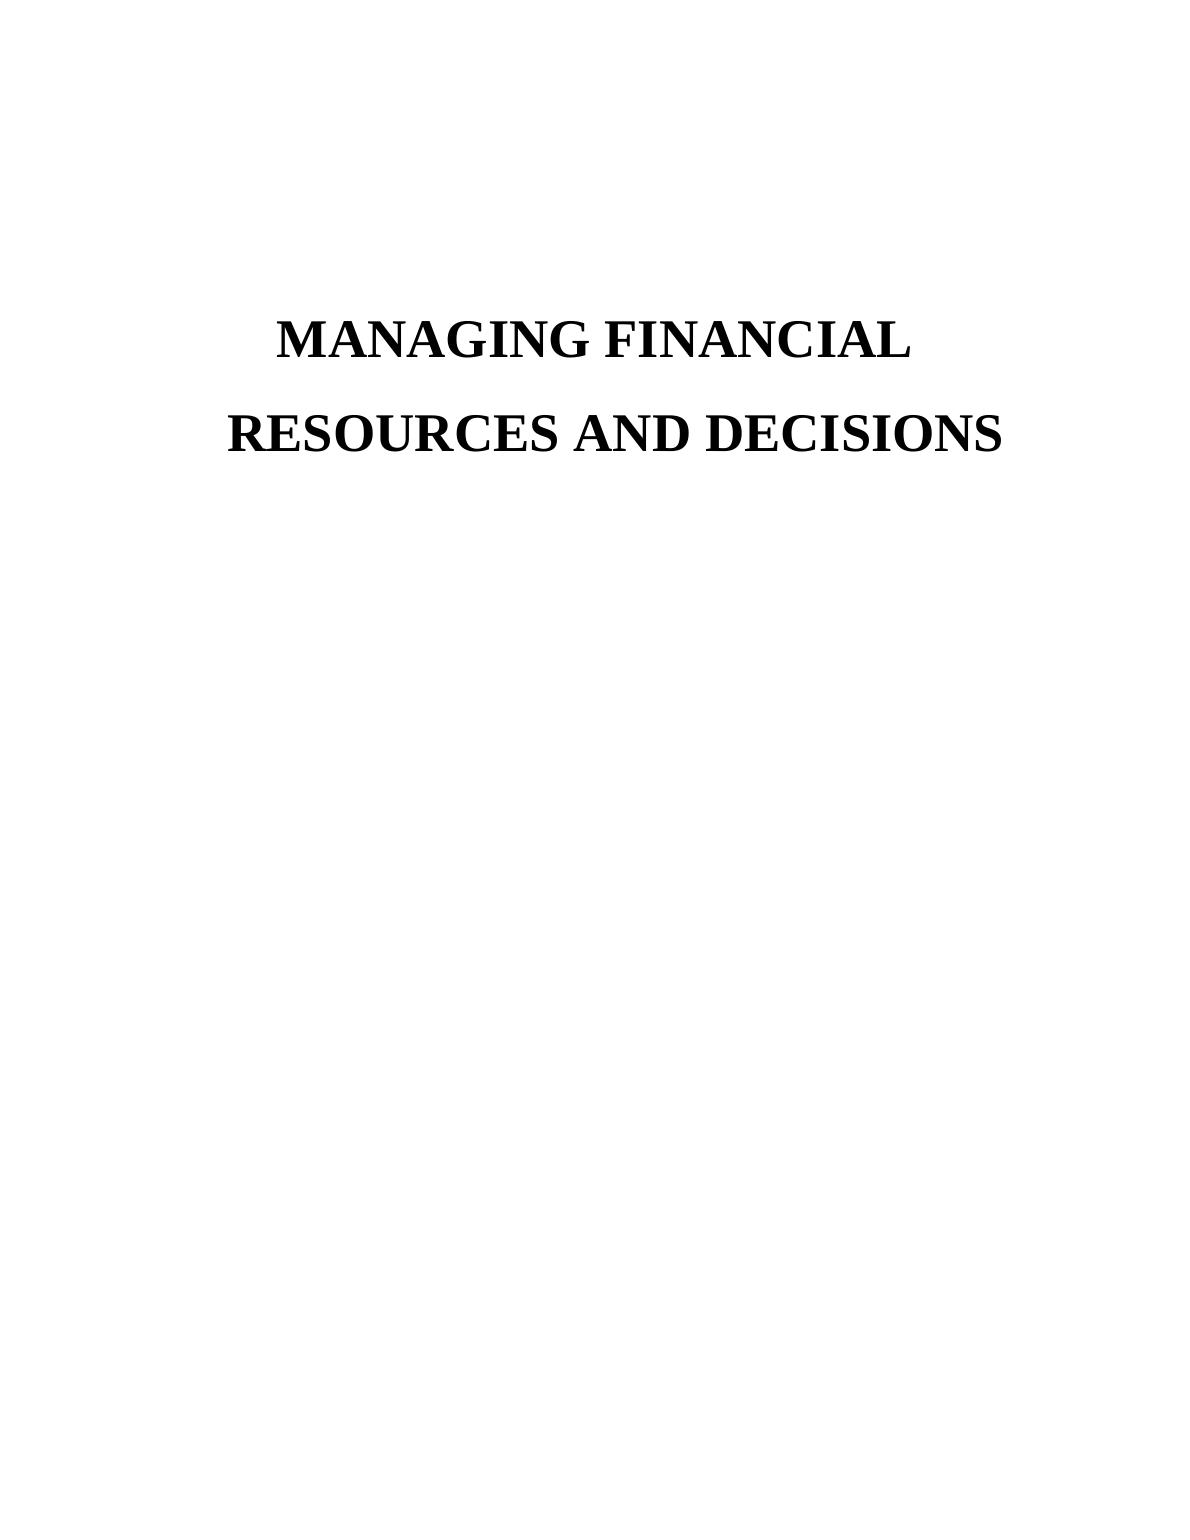 MANAGING FINANCIAL RESOURCES AND DECISIONS TABLE OF CONTENTS INTRODUCTION_1